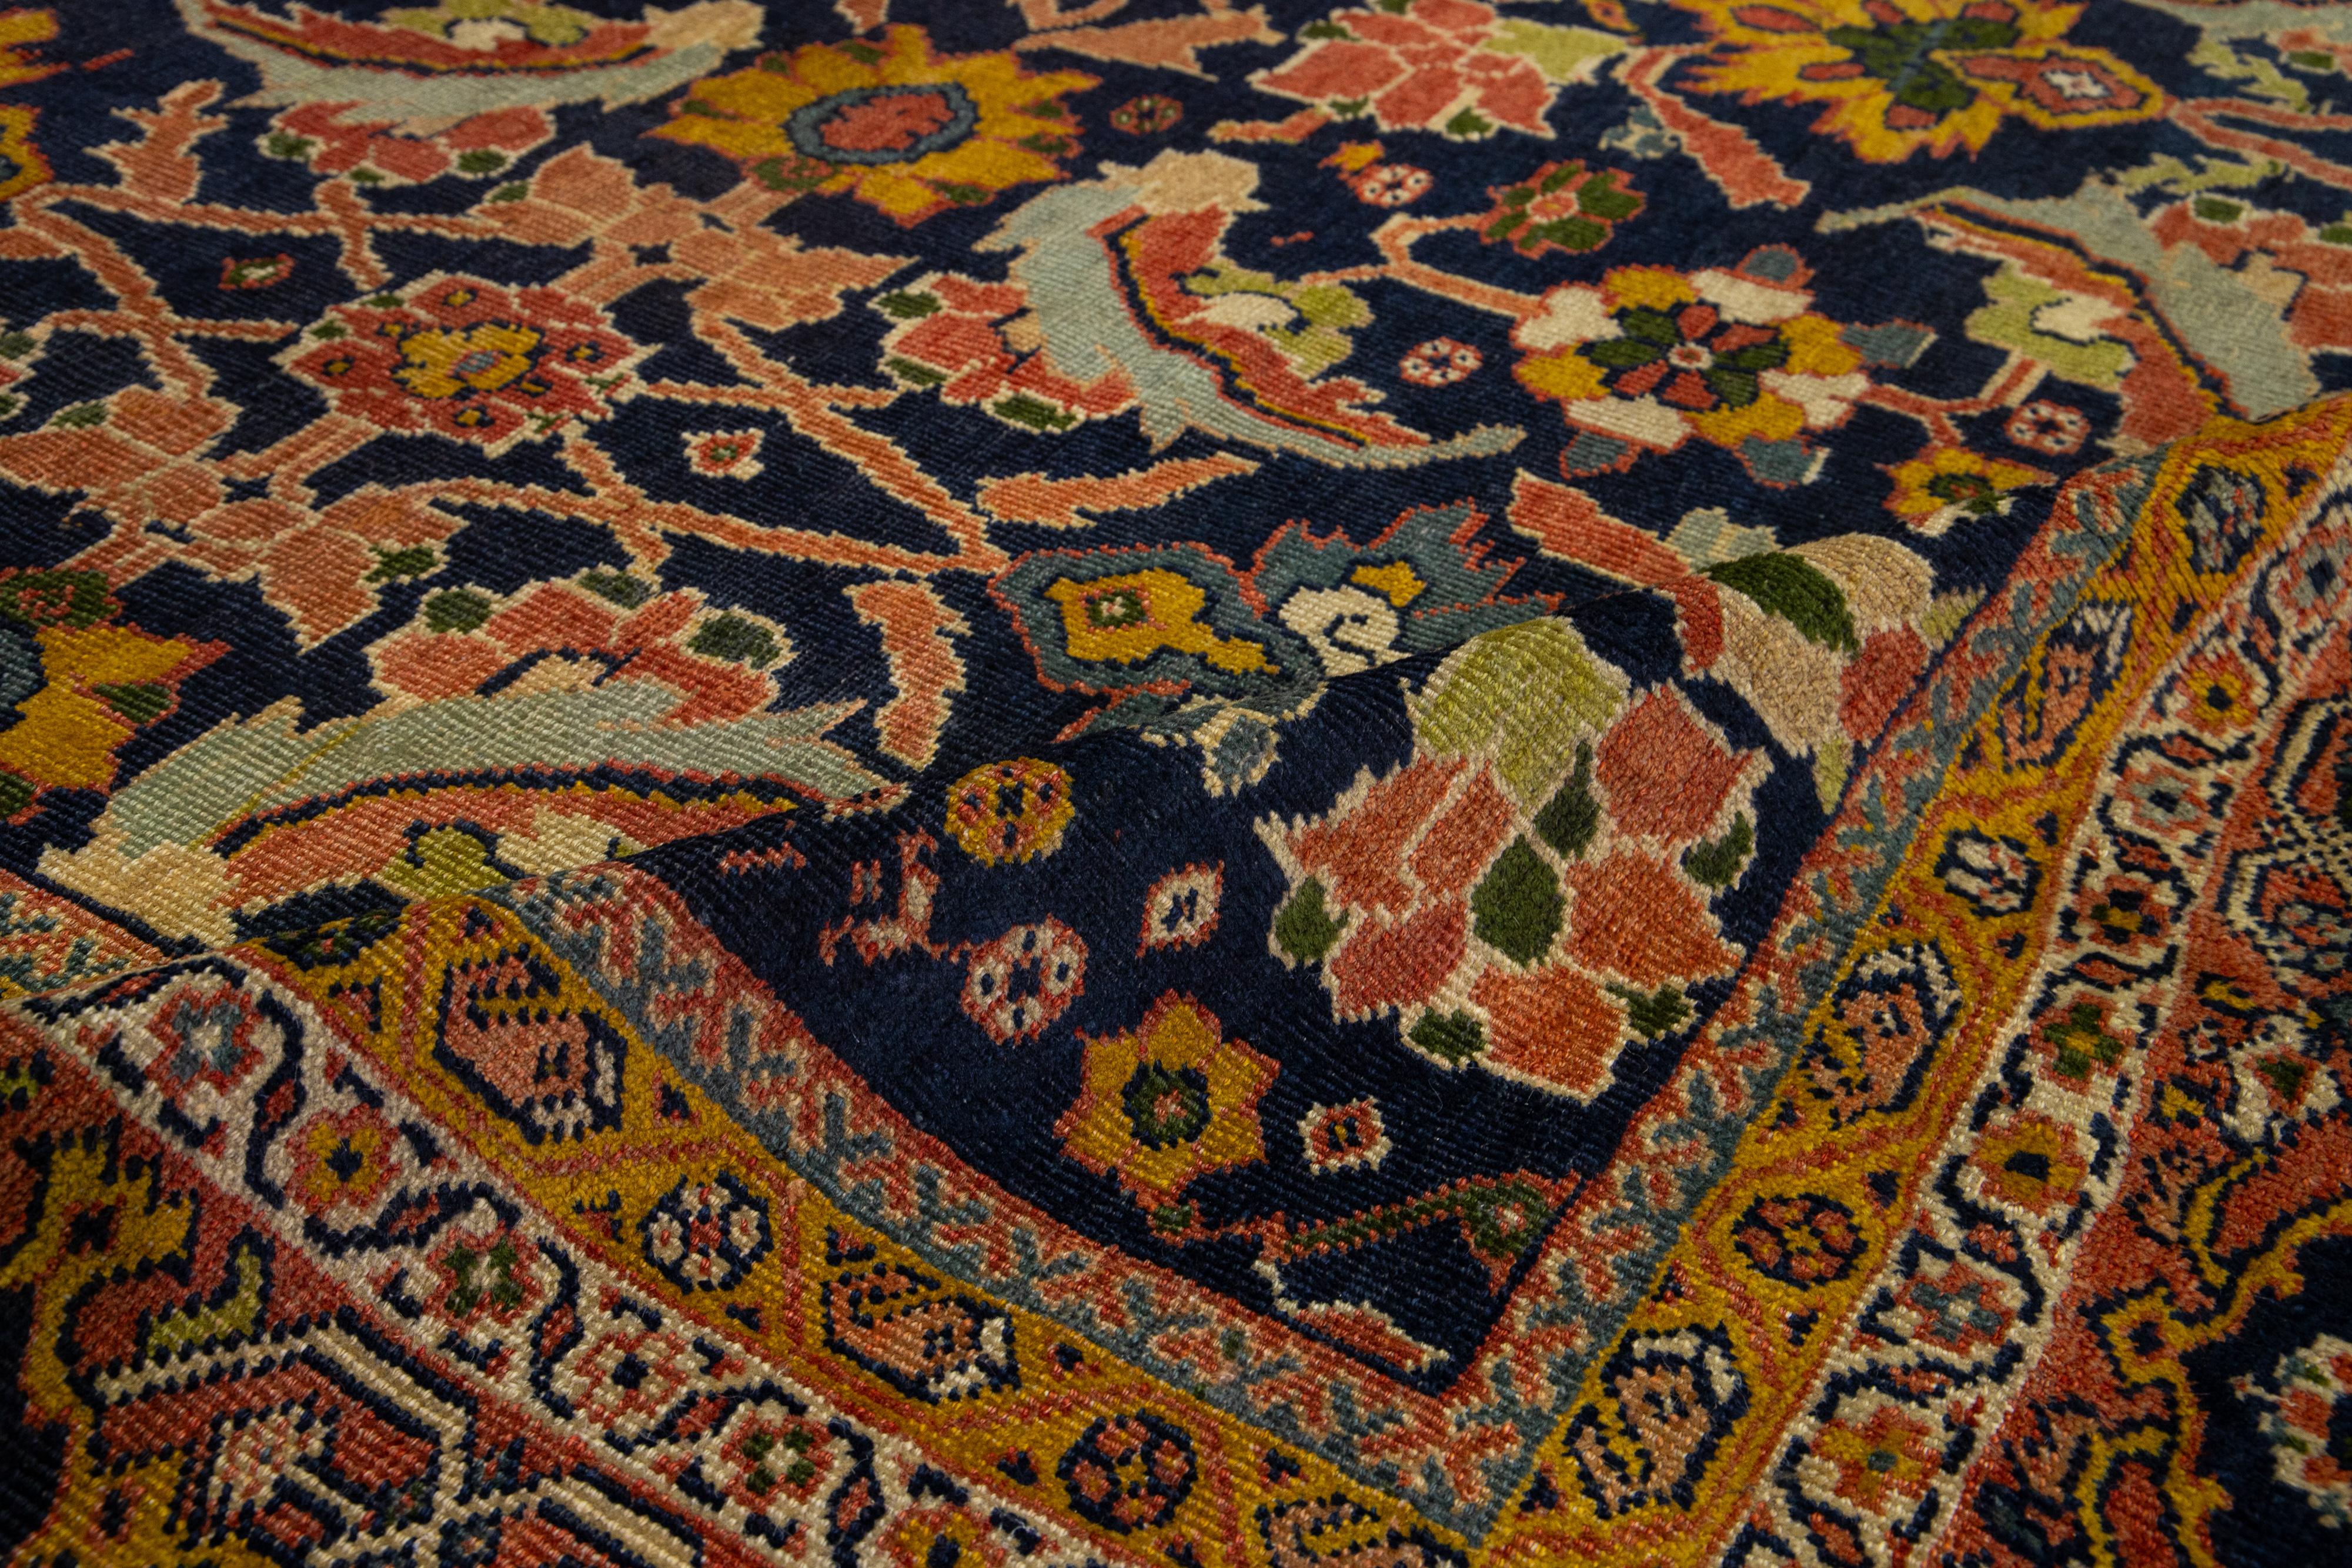 Blue Antique Persian Sultanabad Wool Rug From the 1880s With Floral Motif For Sale 4